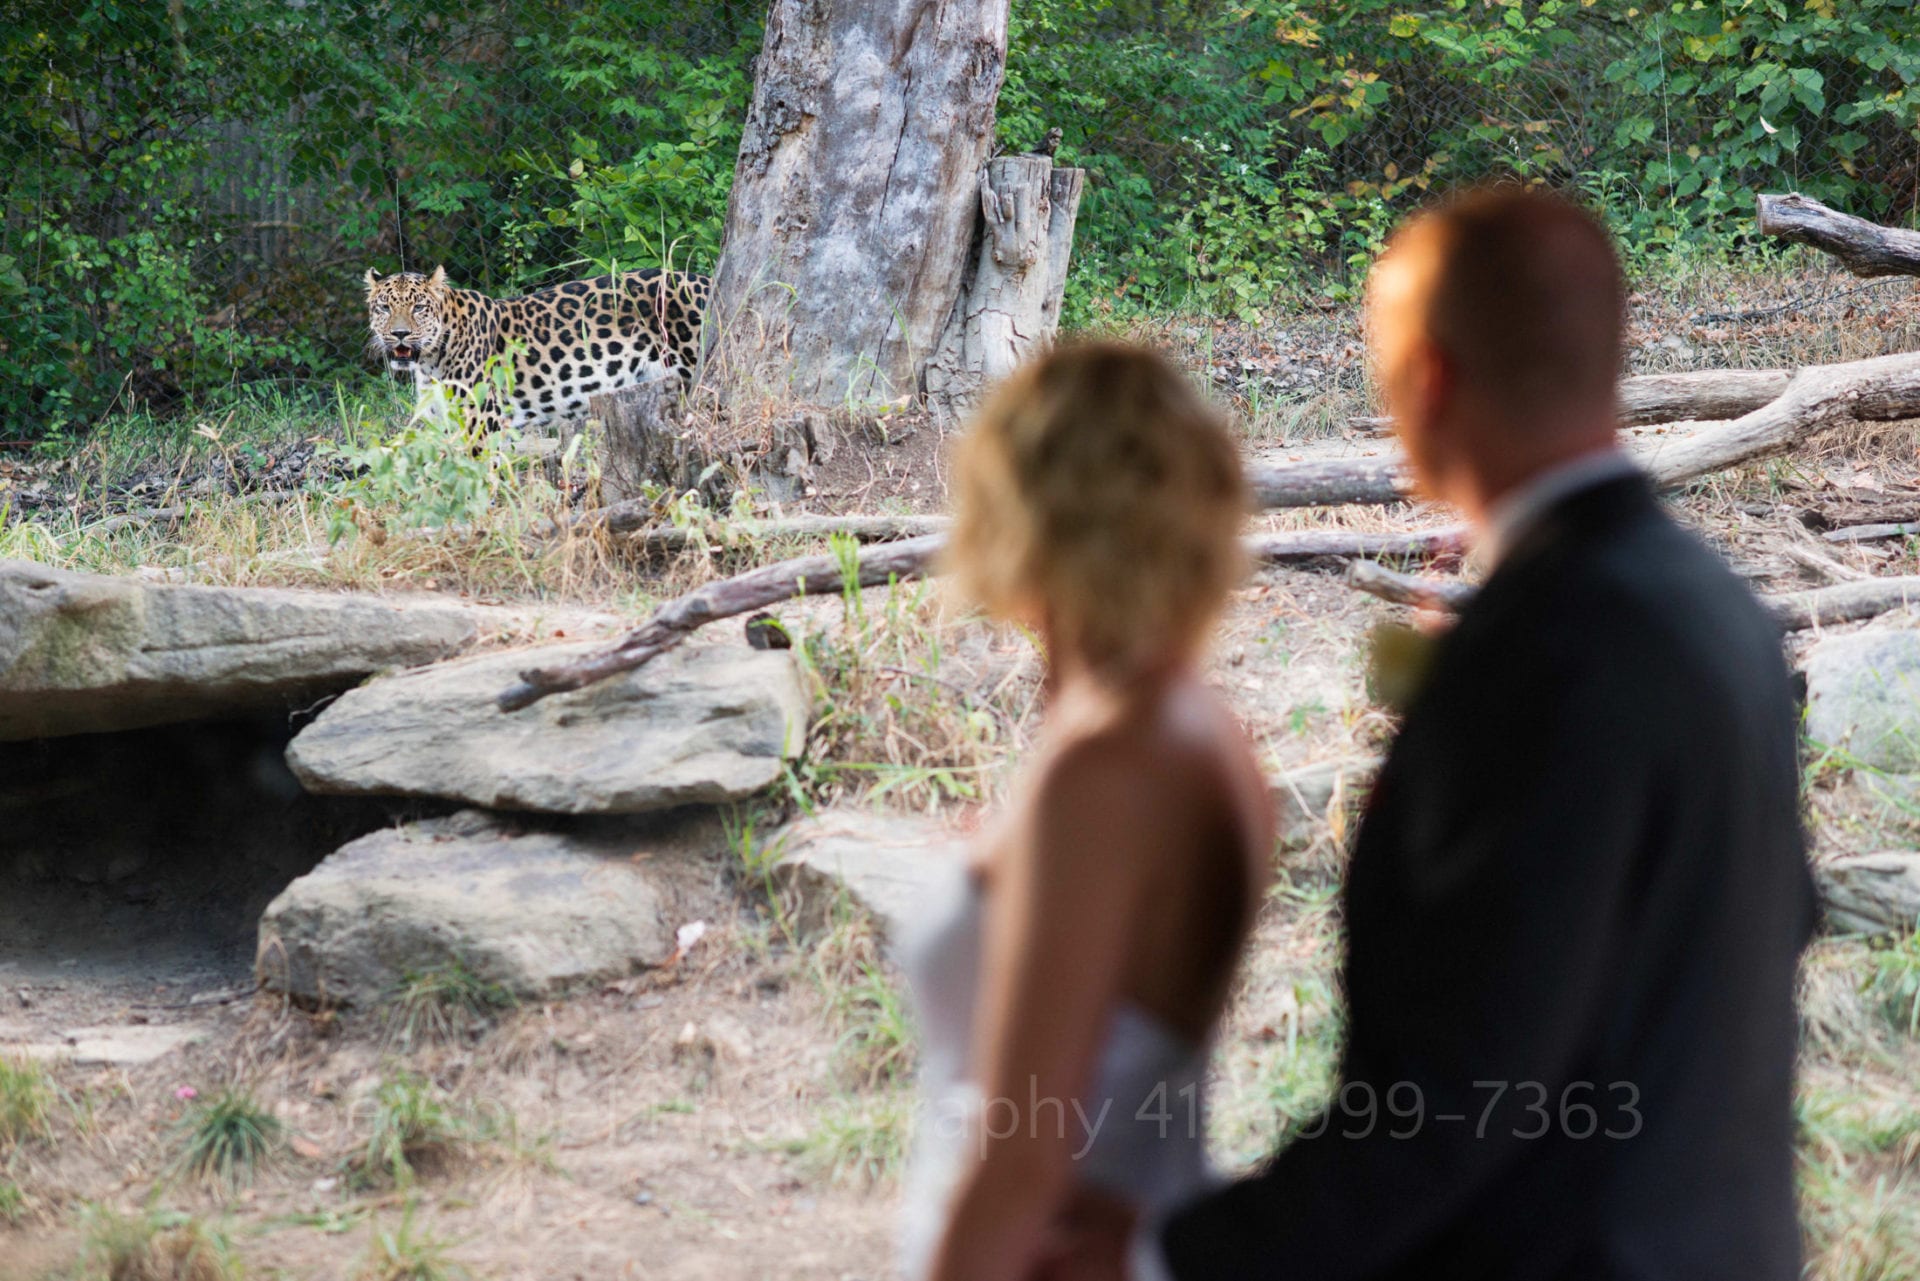 A bride and groom stand in the foreground and look at a leopard who stands behind a tree and looks back at them.